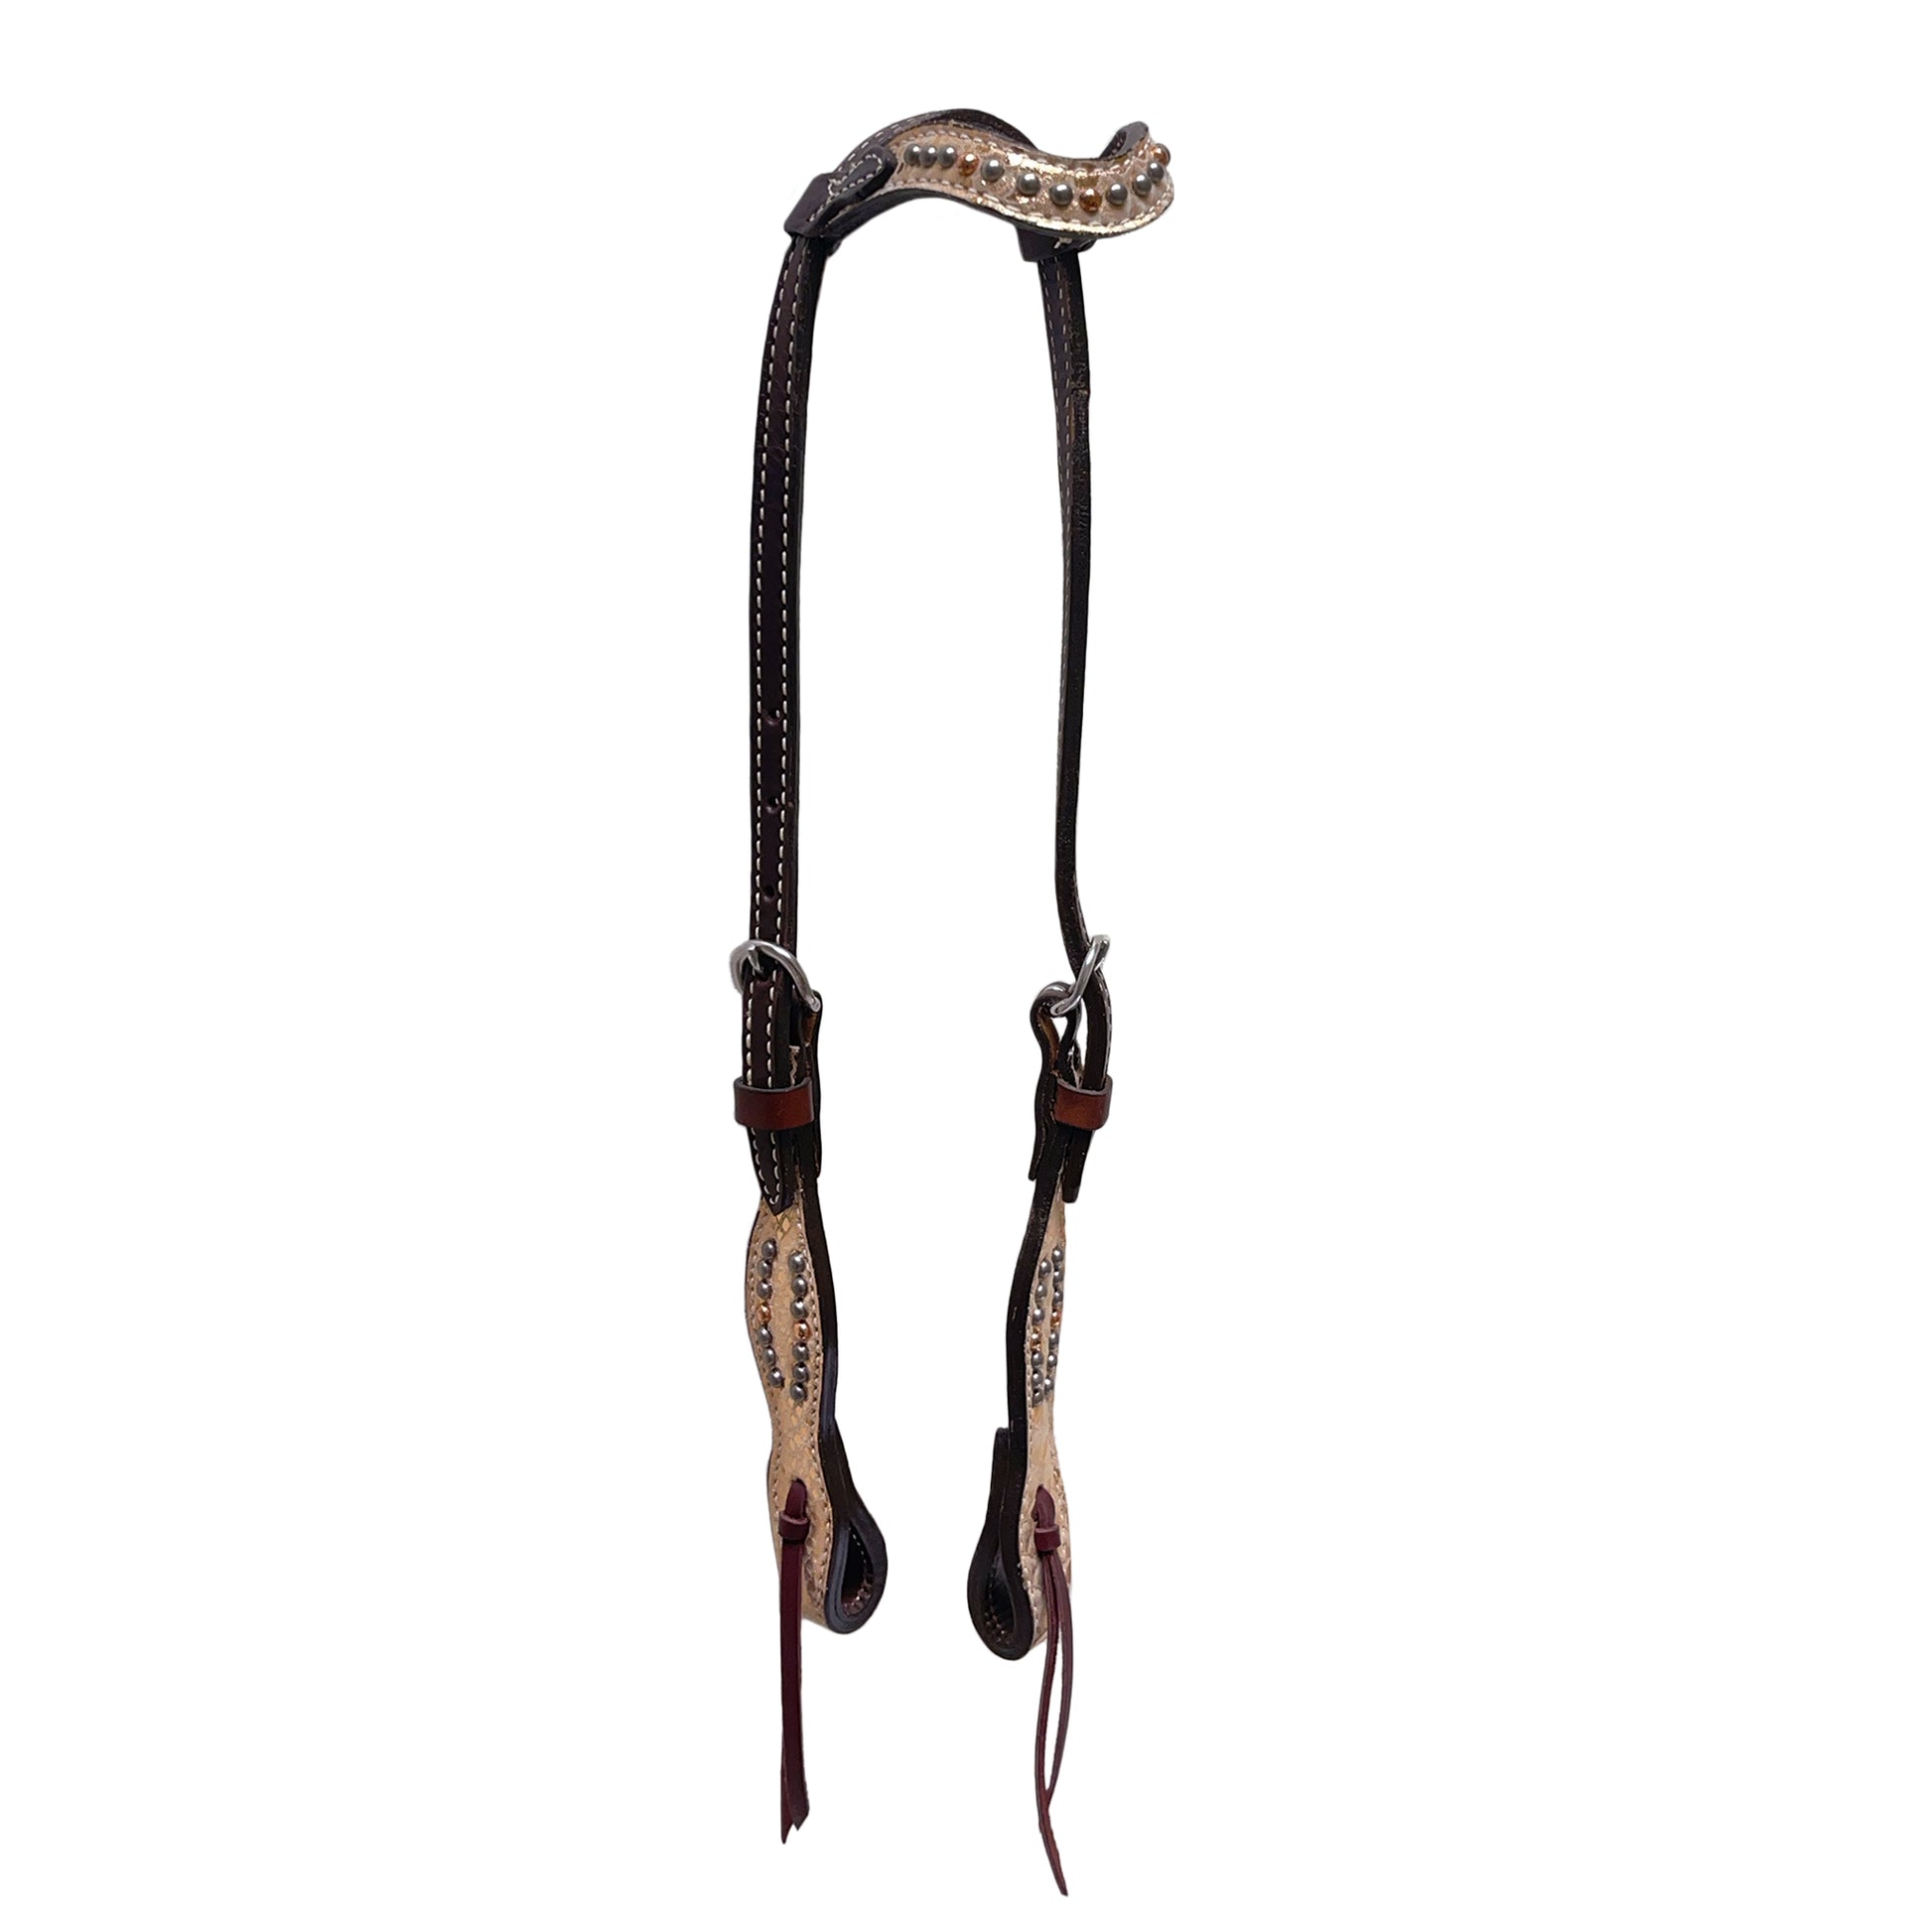 5/8" Wave one ear headstall chocolate leather mystic overlay with pewter and copper spots.